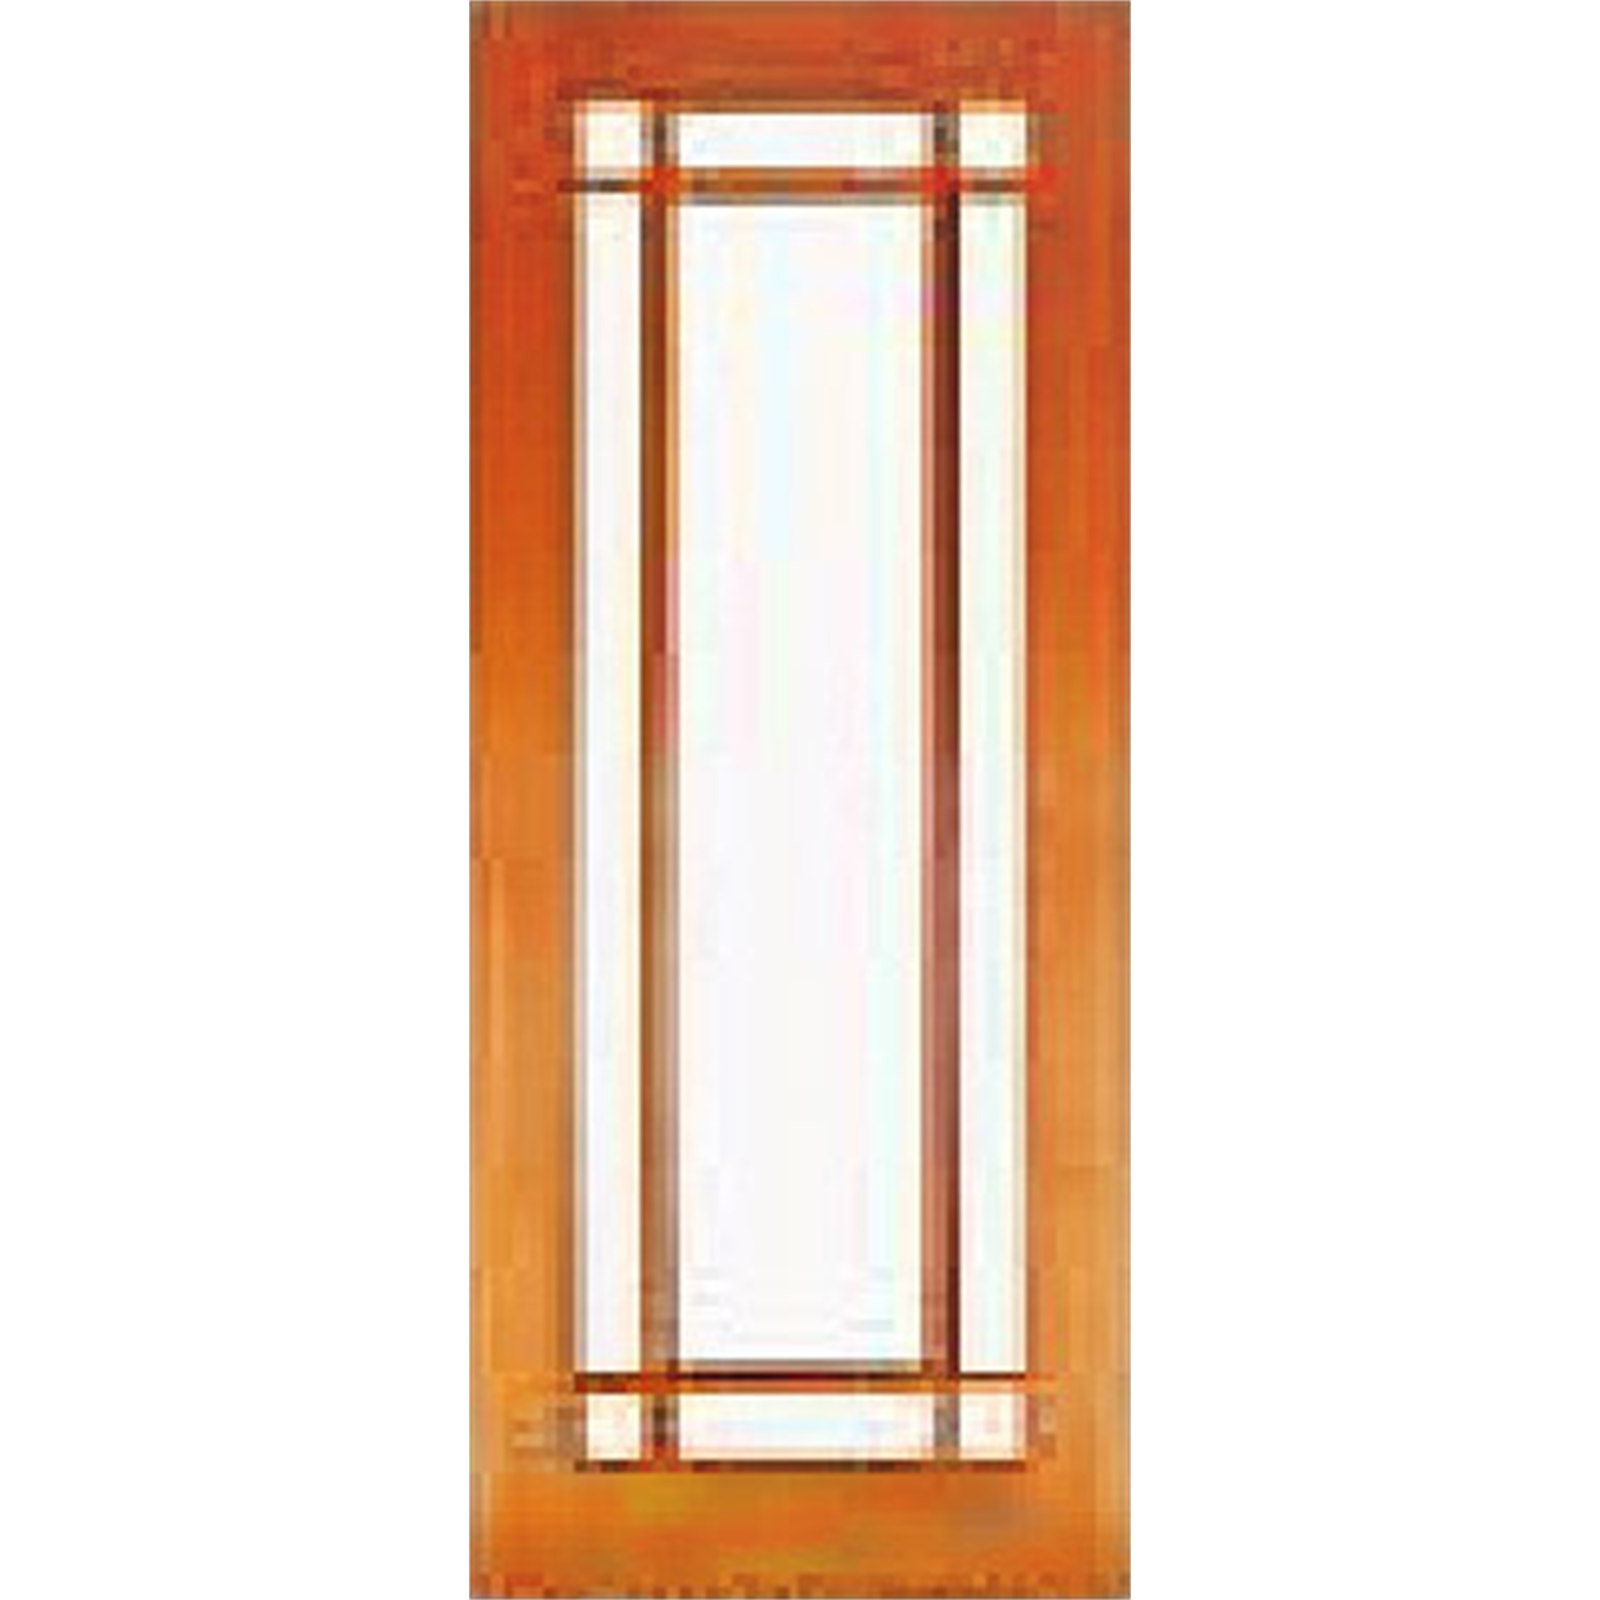 Woodcraft Doors 2040 x 820 x 40mm Federation Clear Safety Glass Entrance Door